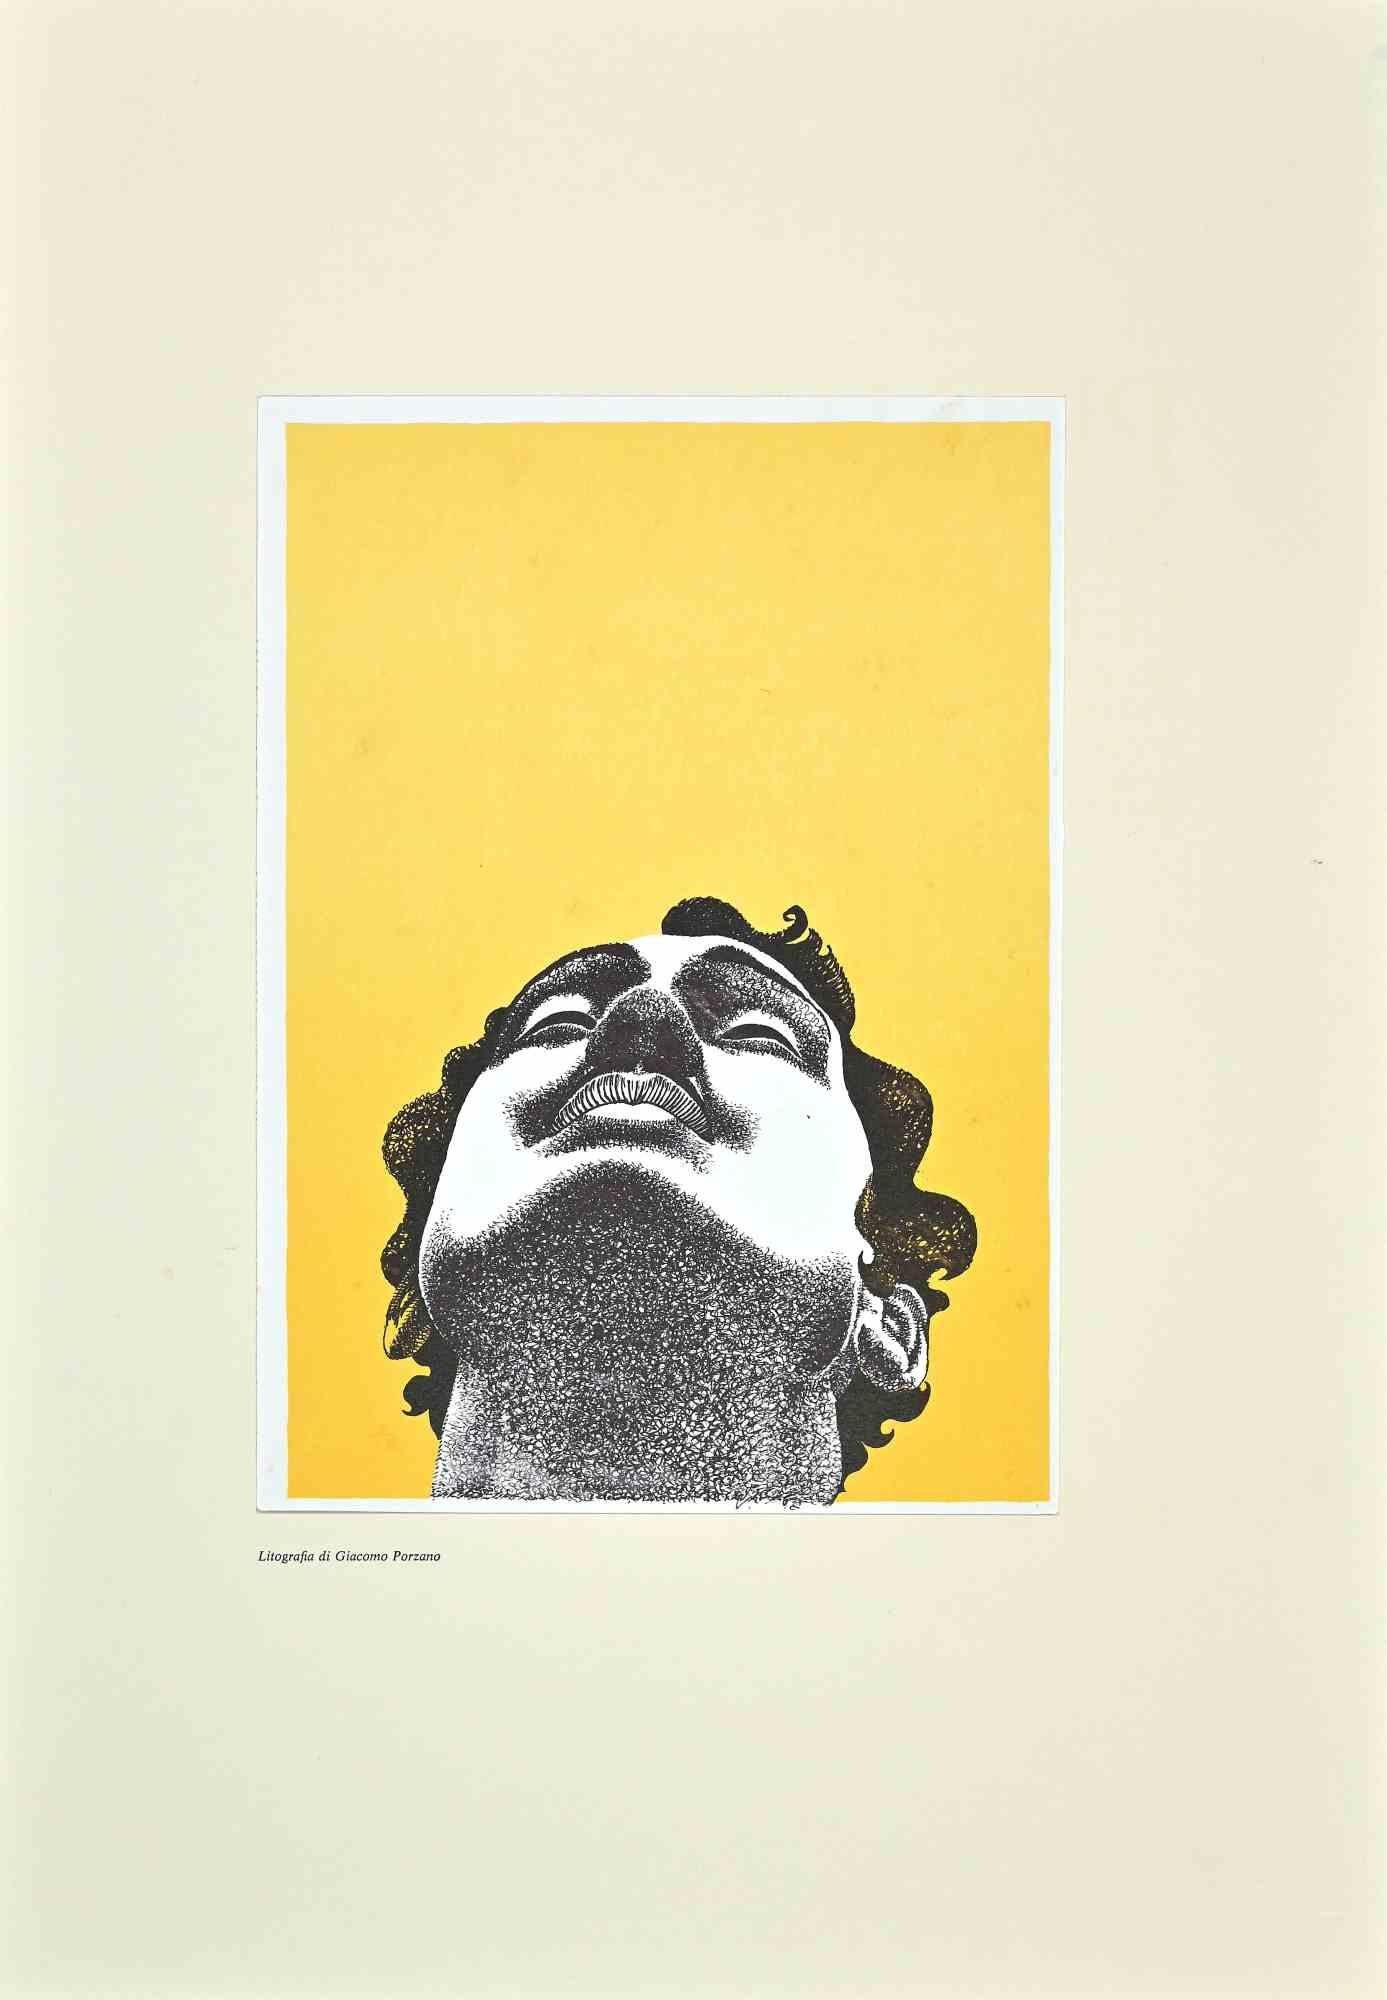 The Face is a lithograph realized in 1973 by the Italian artist Giacomo Porzano (1925-2006).

Hand-signed on the lower.

Numbered, edition of XX prints.

In good condition.

Included a Passepartout: 45 x 31 cm